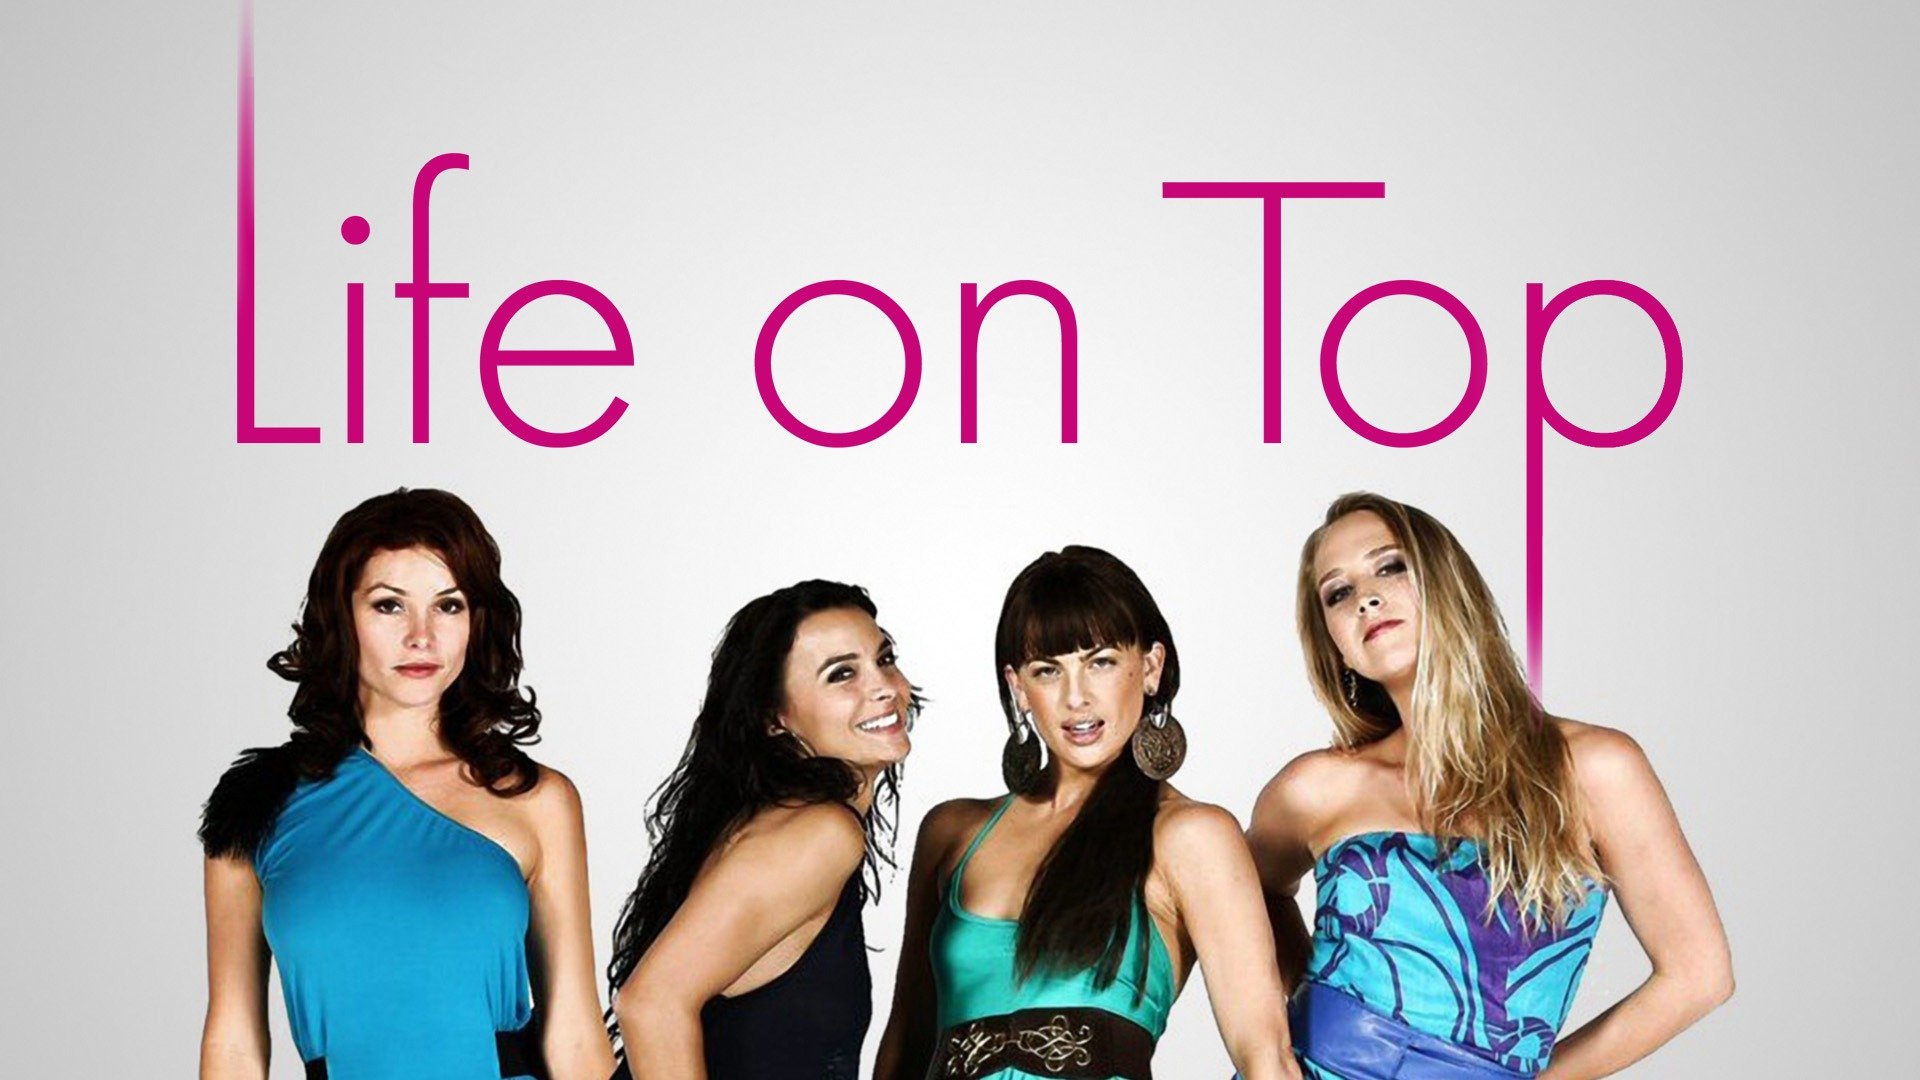 angshuman gupta recommends Life On Top S1e1